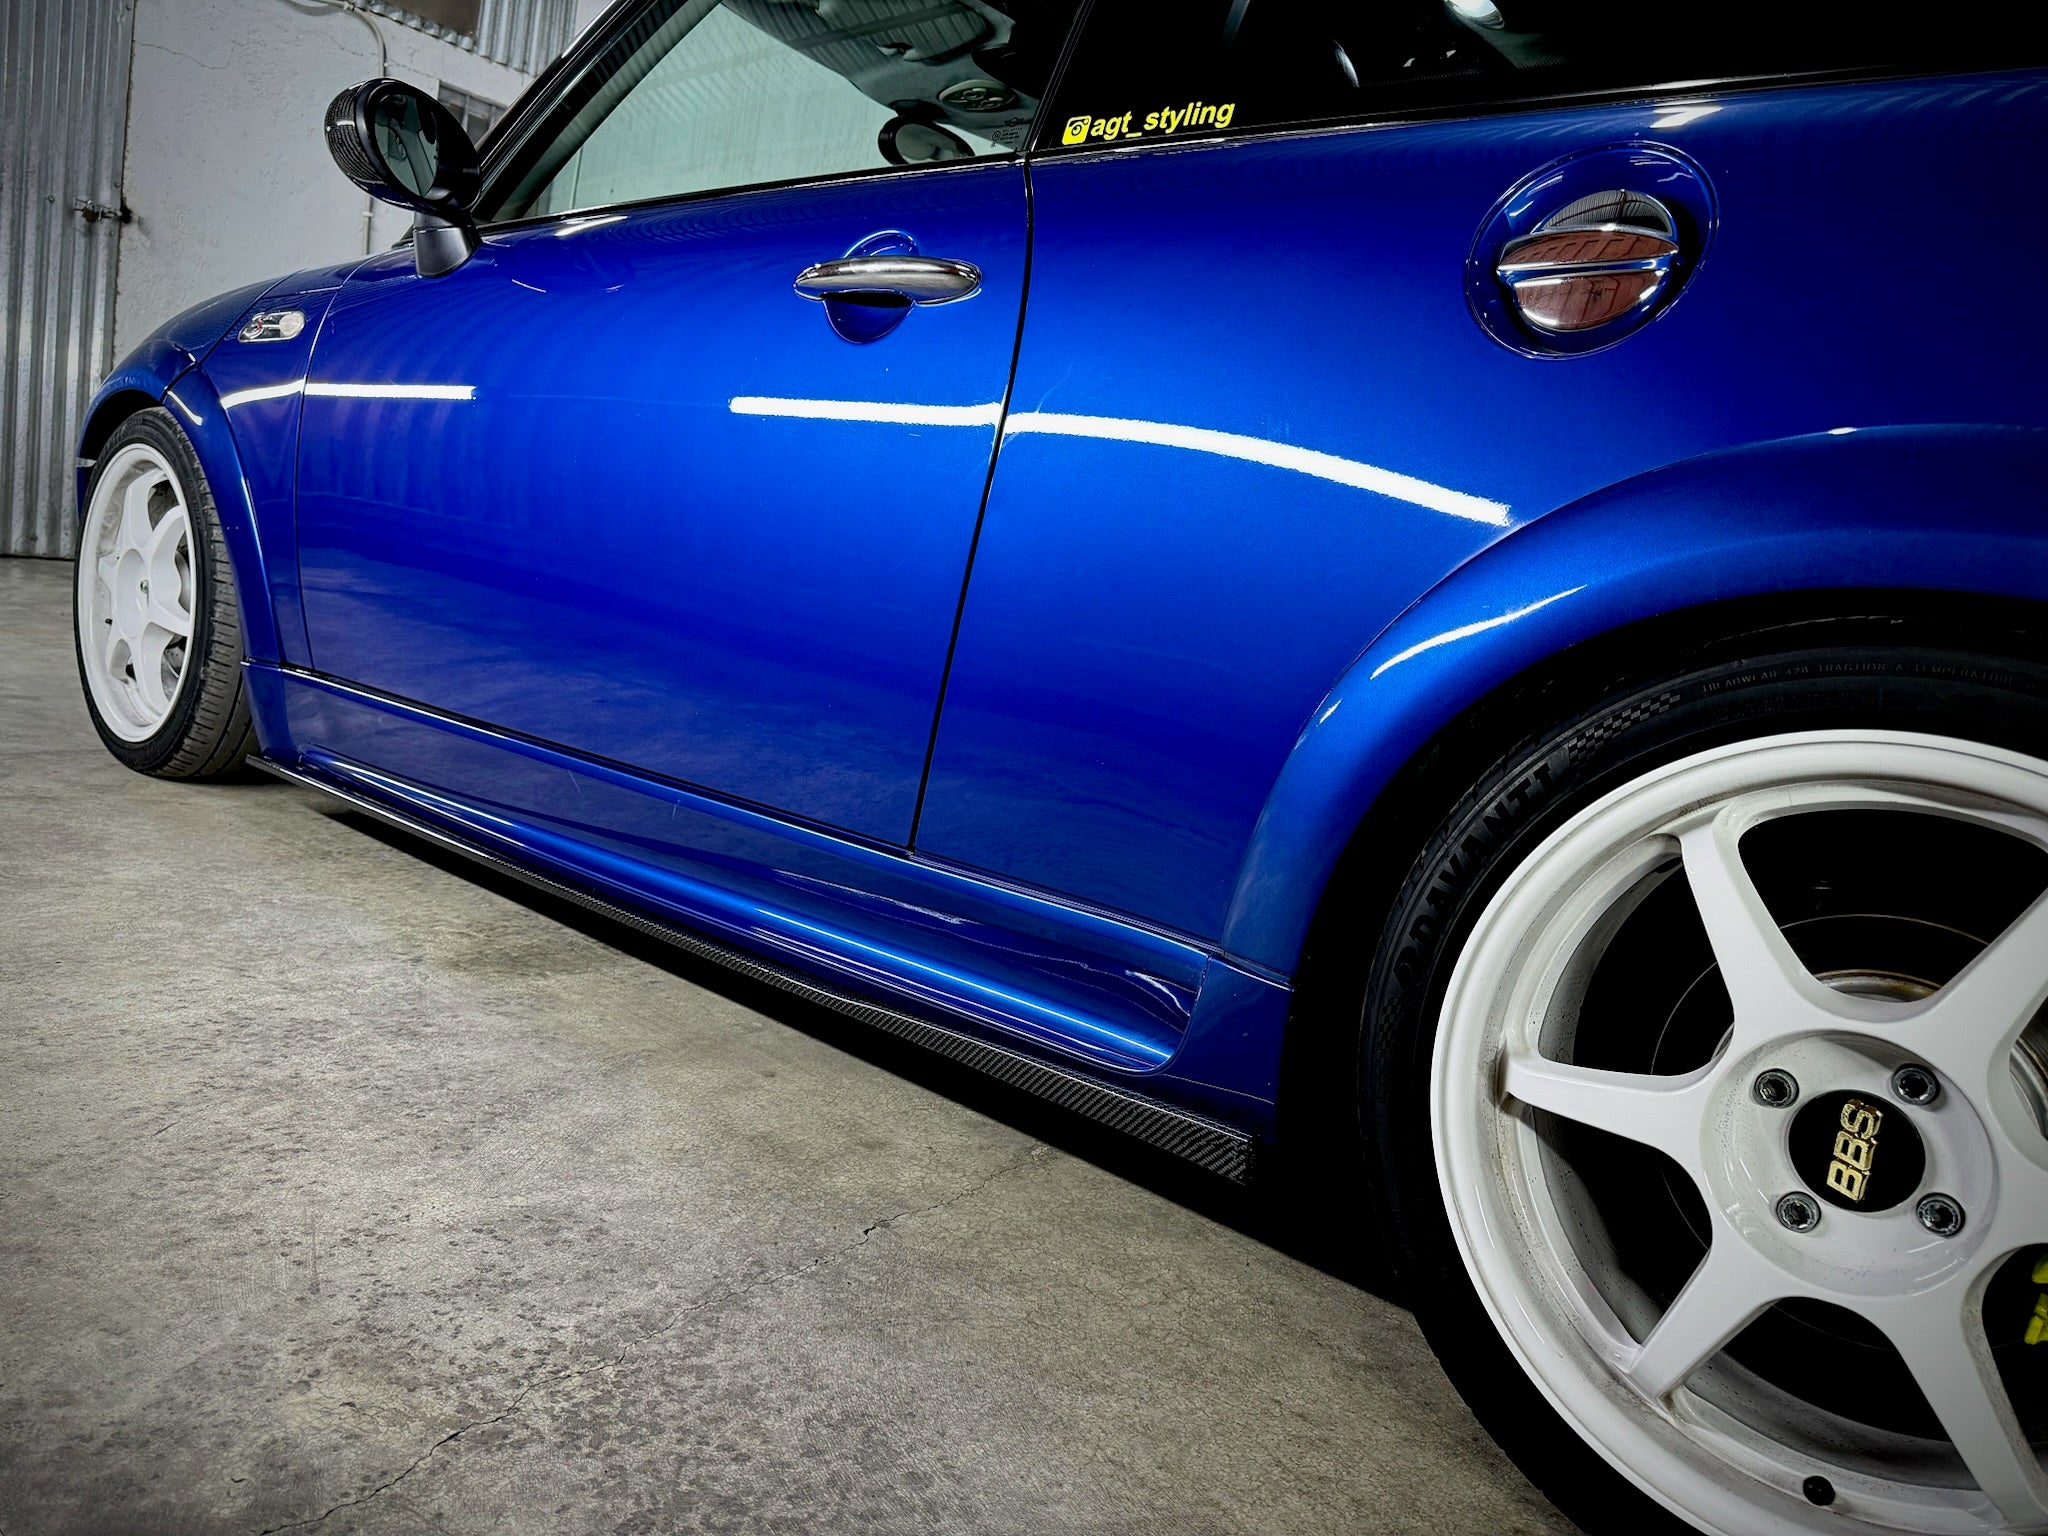 Cooper S R53 side skirts extensions